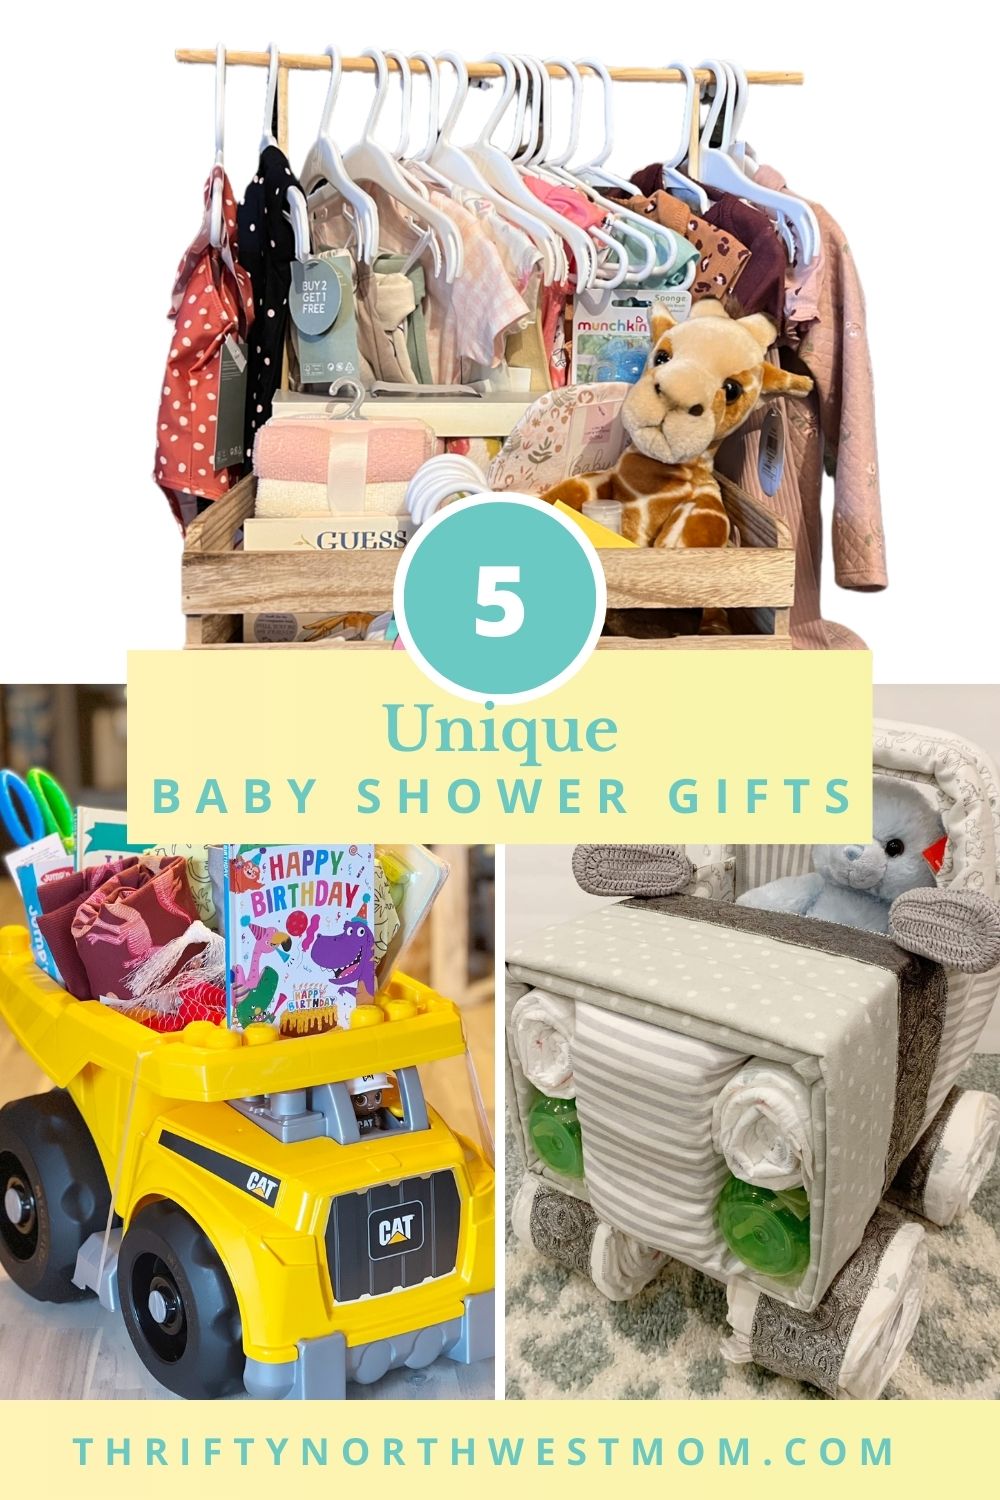 How to Buy Unique Baby Shower Gifts?